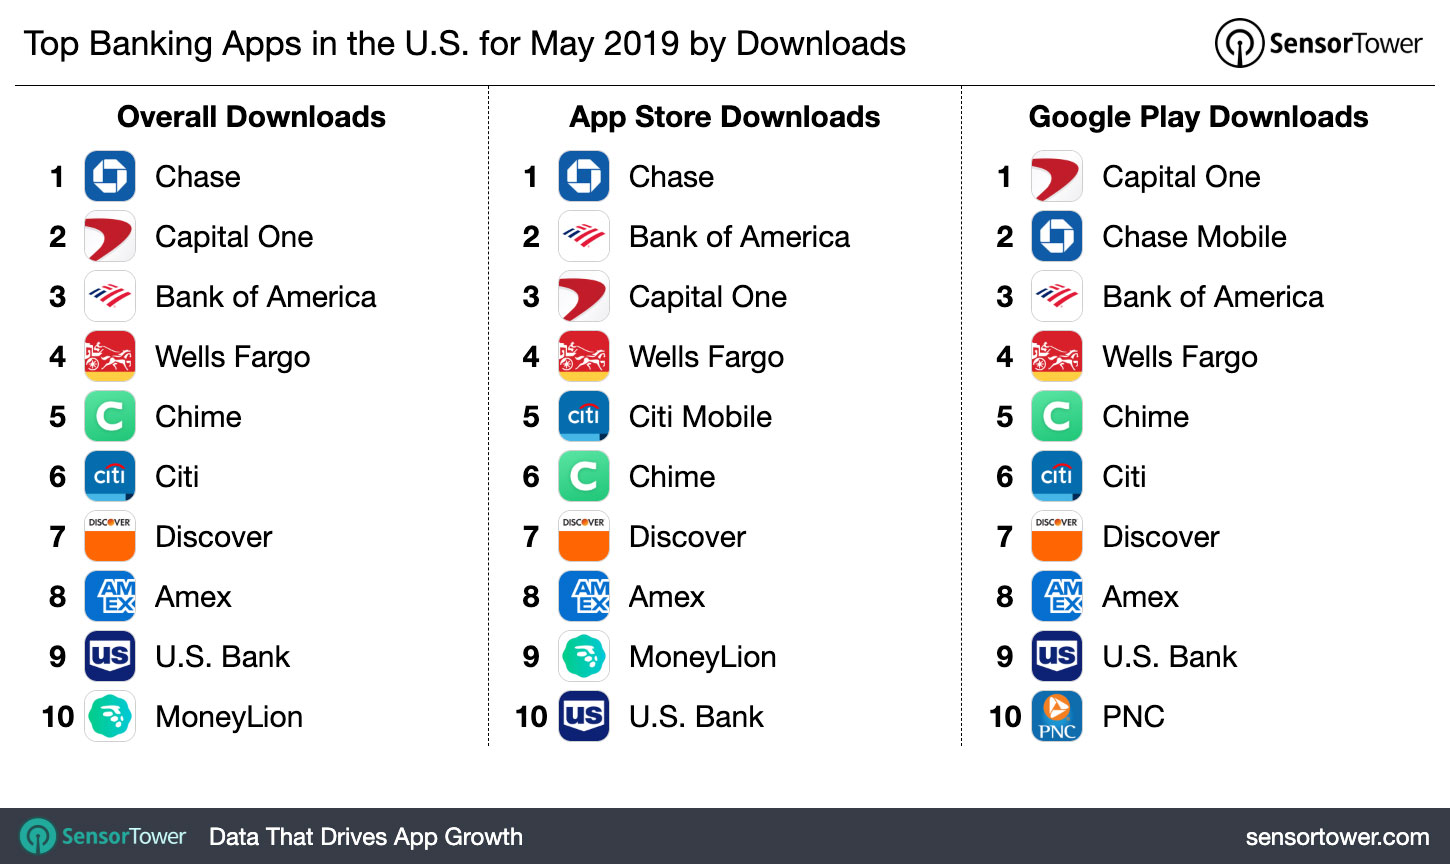 Top Banking Apps in the U.S. for May 2019 by Downloads